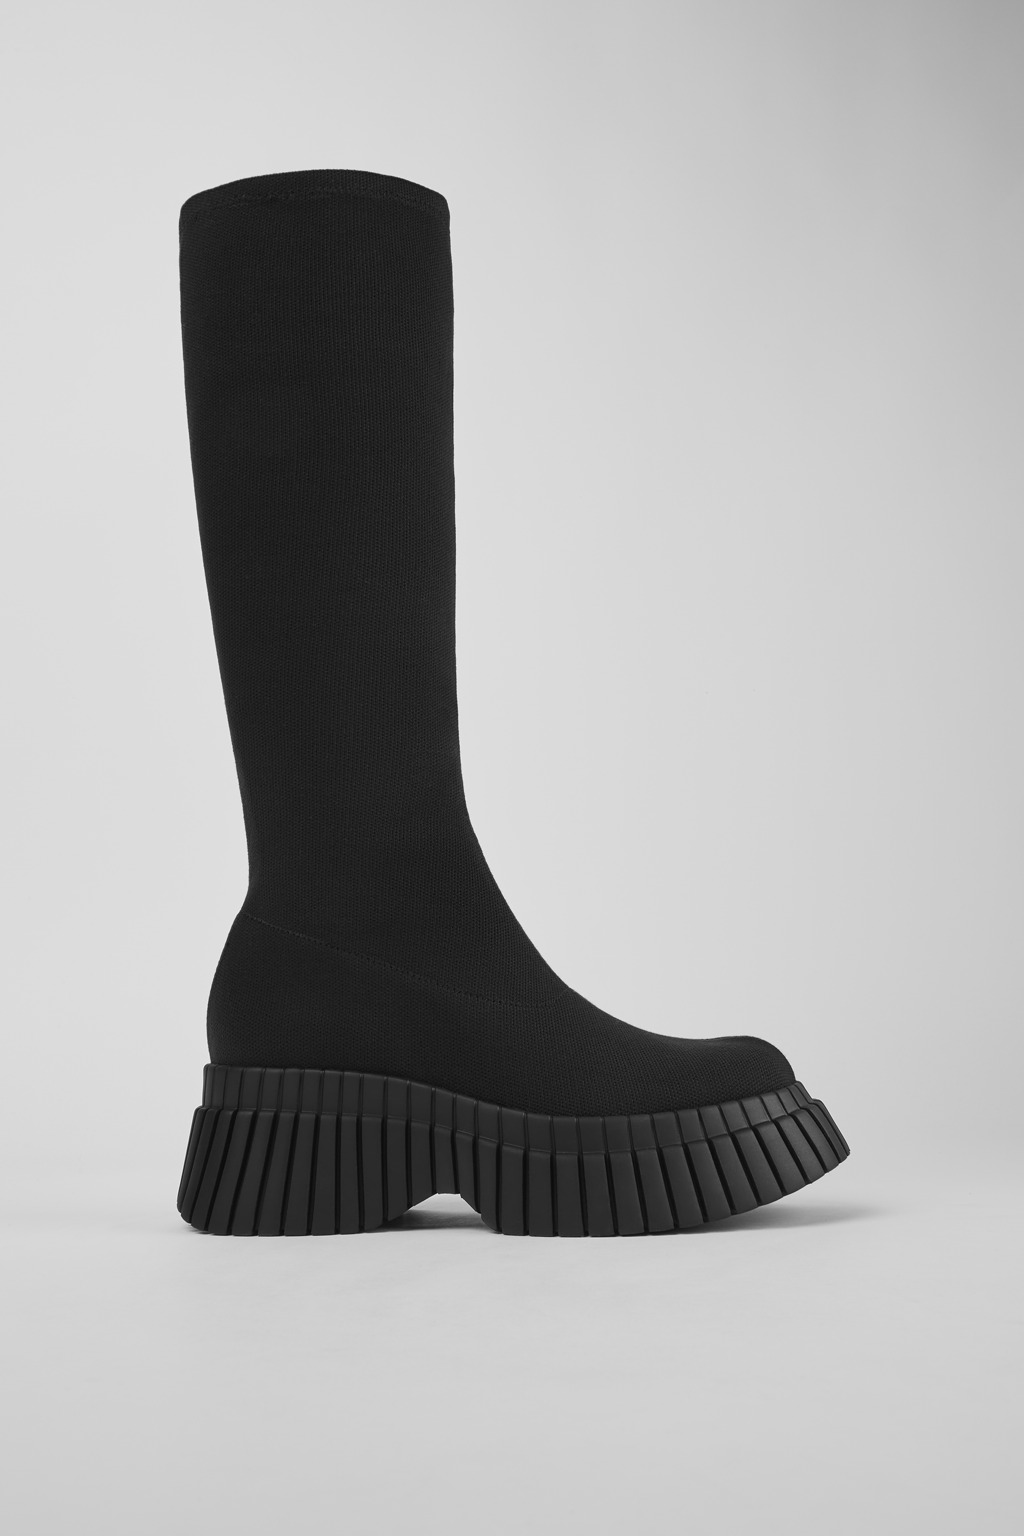 Black Boots for Women - Fall/Winter collection - Camper USA